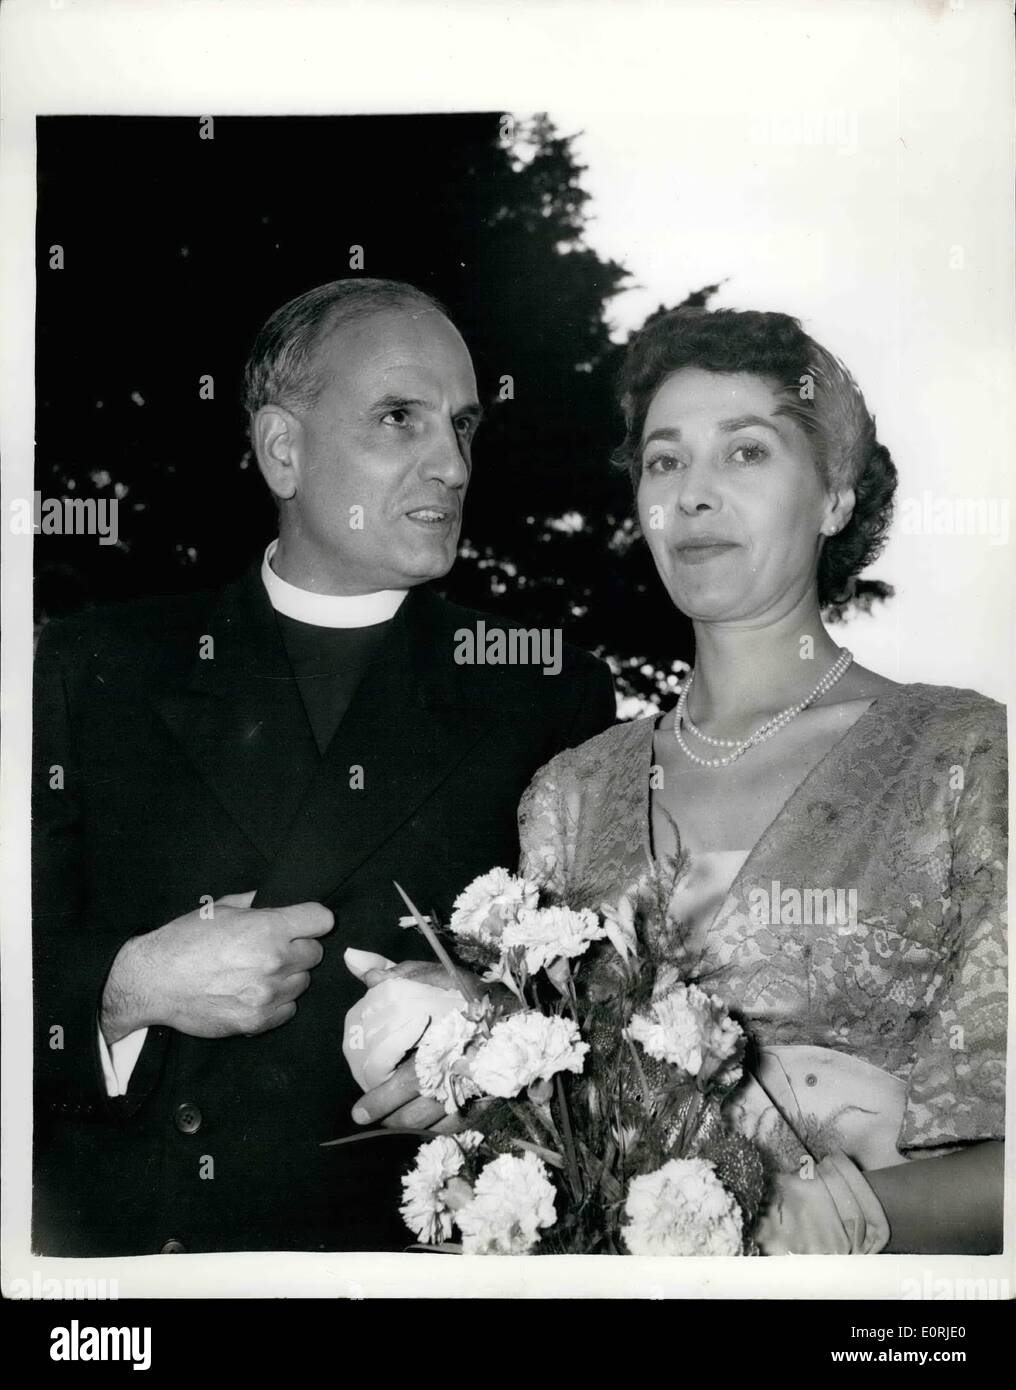 Oct. 10, 1959 - The Vicar weds a barmaid: Ex-barmaid Catherine Ling married the vicar yesterday at the village of Whitwell, in the Isle of wight. The Rev. John Elliott Roberts, 45-year-old former naval chaplain, met Catherine, aged 32, when she worked at a local hotel bar. The wedding was conducted by the vicar's brother, the Bishop of Mallmesbury, Wiltshire. Photo shows the Rev. John Elliot Roberts leaving the church with his bride, Catherine Ling, after their wedding yesterday. Stock Photo